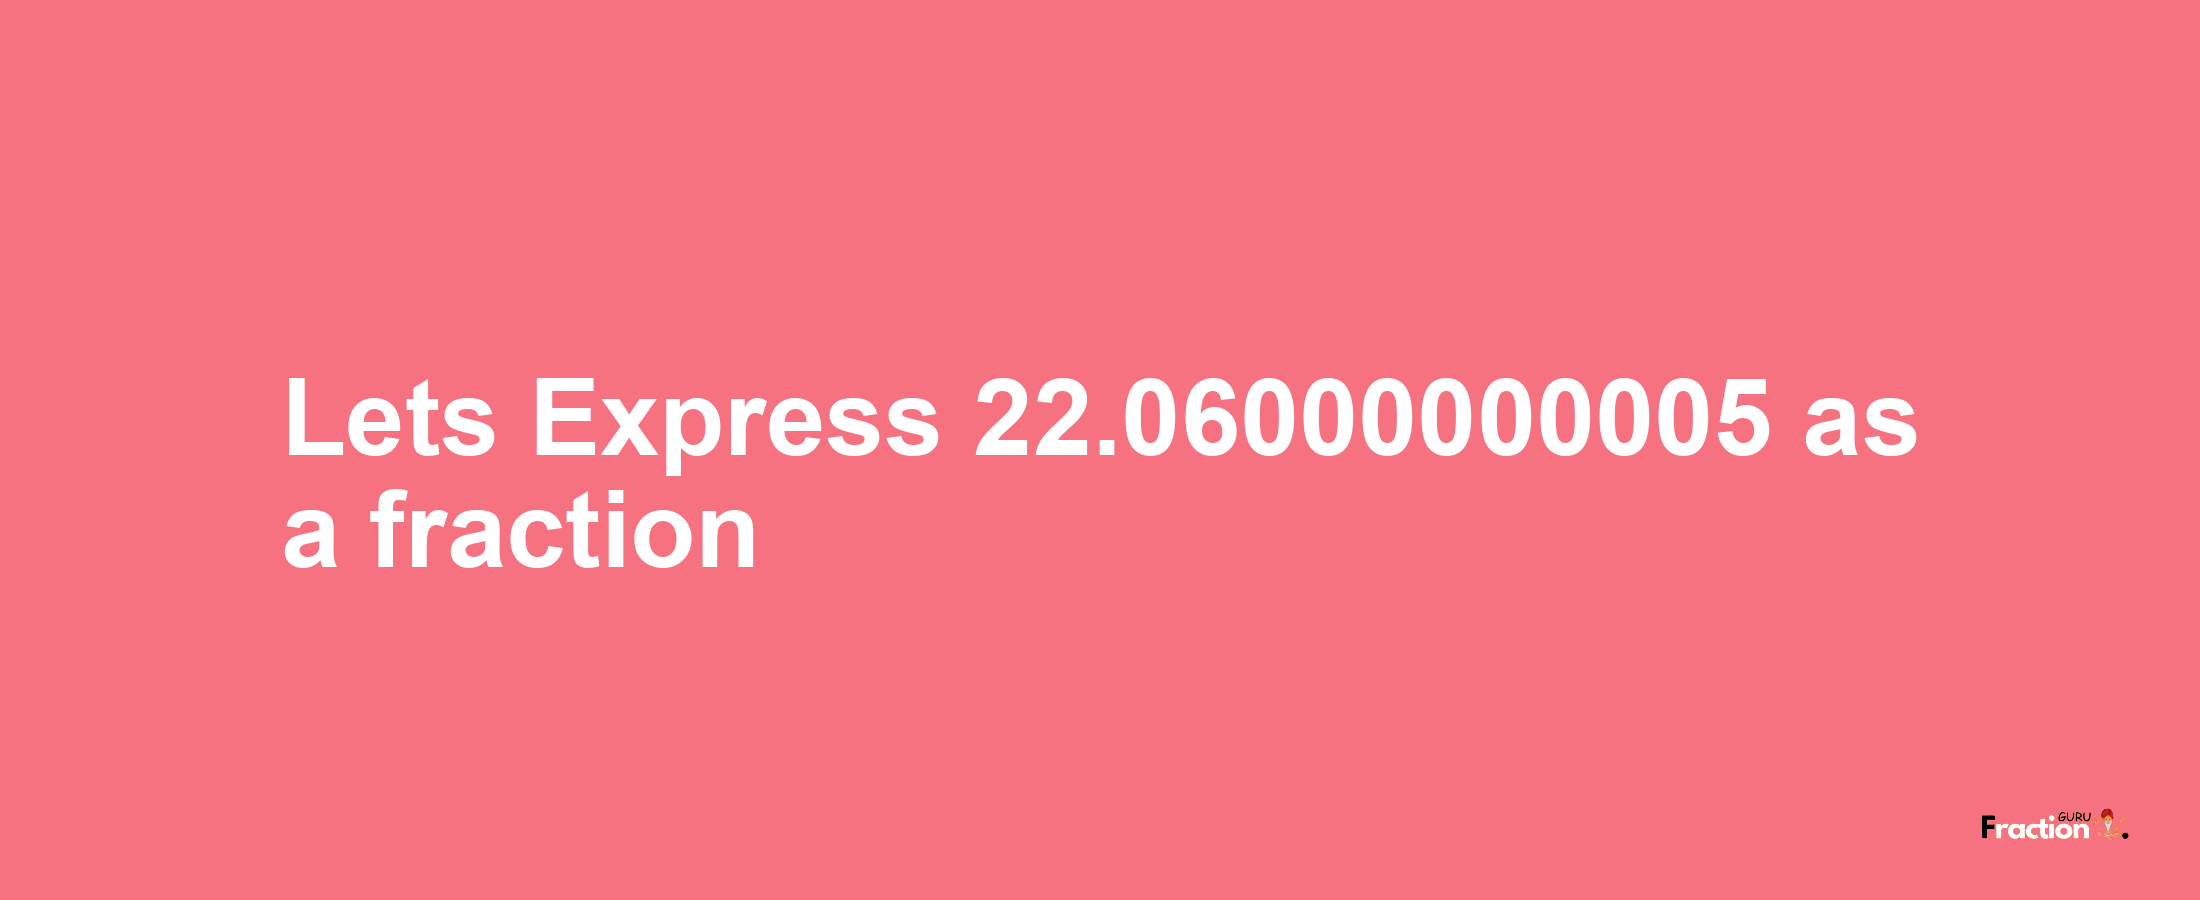 Lets Express 22.06000000005 as afraction